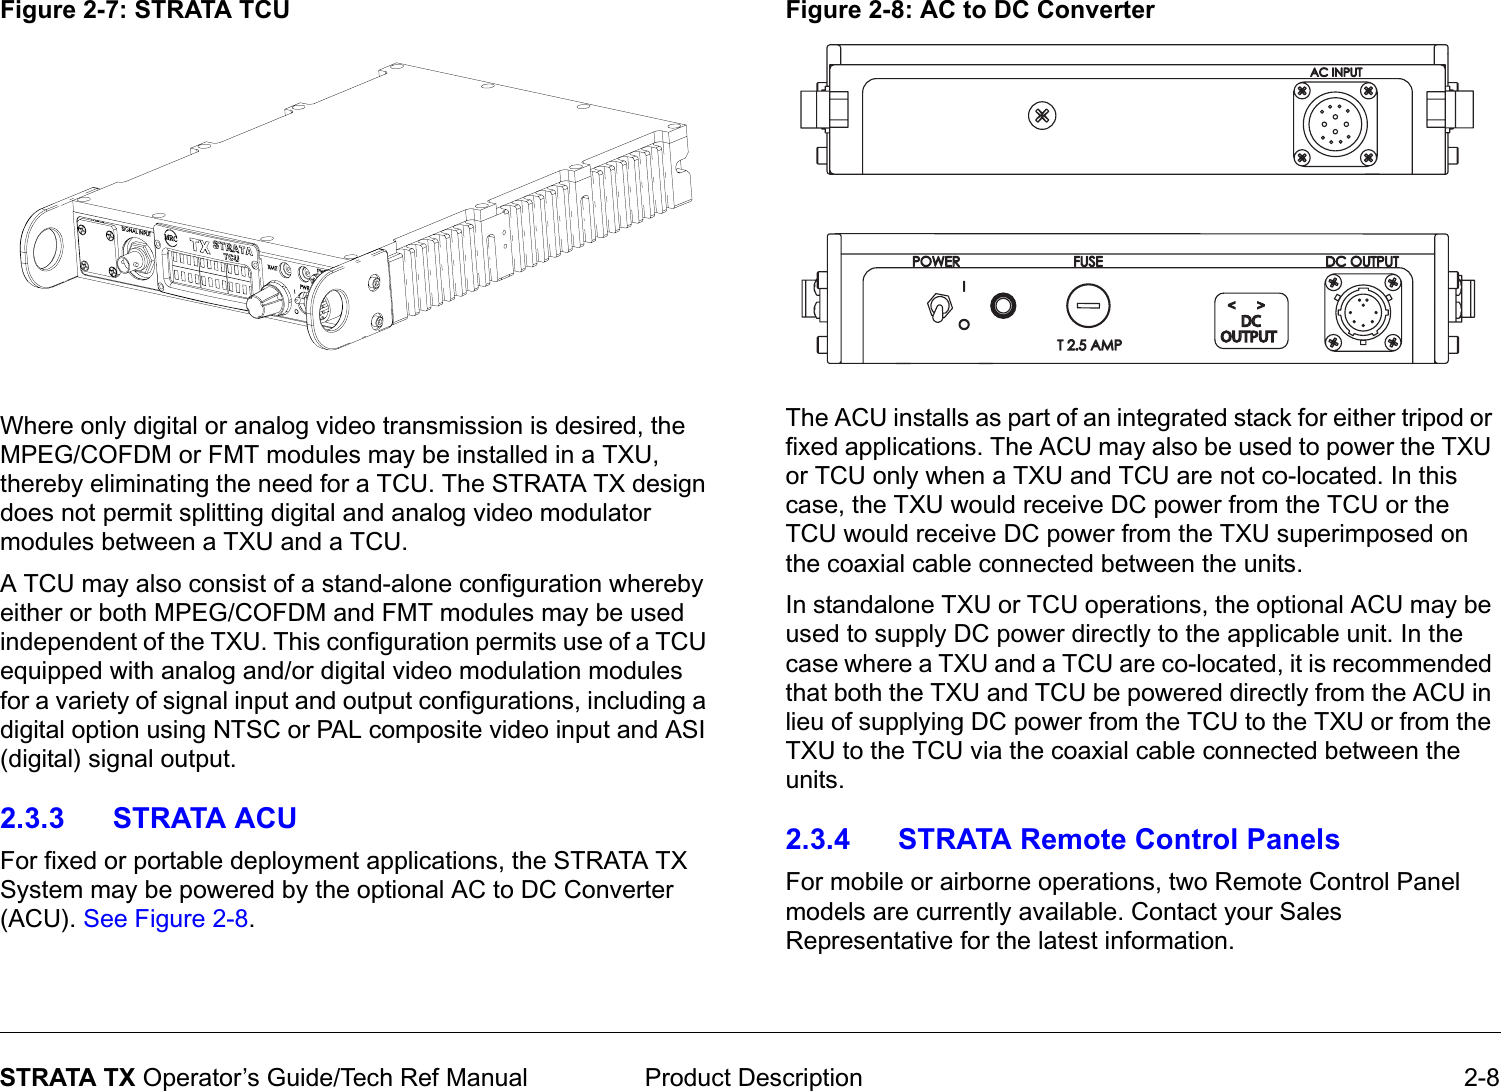  Product Description 2-8STRATA TX Operator’s Guide/Tech Ref ManualFigure 2-7: STRATA TCUWhere only digital or analog video transmission is desired, the MPEG/COFDM or FMT modules may be installed in a TXU, thereby eliminating the need for a TCU. The STRATA TX design does not permit splitting digital and analog video modulator modules between a TXU and a TCU. A TCU may also consist of a stand-alone configuration whereby either or both MPEG/COFDM and FMT modules may be used independent of the TXU. This configuration permits use of a TCU equipped with analog and/or digital video modulation modules for a variety of signal input and output configurations, including a digital option using NTSC or PAL composite video input and ASI (digital) signal output. 2.3.3 STRATA ACUFor fixed or portable deployment applications, the STRATA TX System may be powered by the optional AC to DC Converter (ACU). See Figure 2-8. Figure 2-8: AC to DC ConverterThe ACU installs as part of an integrated stack for either tripod or fixed applications. The ACU may also be used to power the TXU or TCU only when a TXU and TCU are not co-located. In this case, the TXU would receive DC power from the TCU or the TCU would receive DC power from the TXU superimposed on the coaxial cable connected between the units.In standalone TXU or TCU operations, the optional ACU may be used to supply DC power directly to the applicable unit. In the case where a TXU and a TCU are co-located, it is recommended that both the TXU and TCU be powered directly from the ACU in lieu of supplying DC power from the TCU to the TXU or from the TXU to the TCU via the coaxial cable connected between the units.2.3.4 STRATA Remote Control PanelsFor mobile or airborne operations, two Remote Control Panel models are currently available. Contact your Sales Representative for the latest information.OUTPUTOUTPUT&lt;  &gt;&lt;  &gt;DCDC